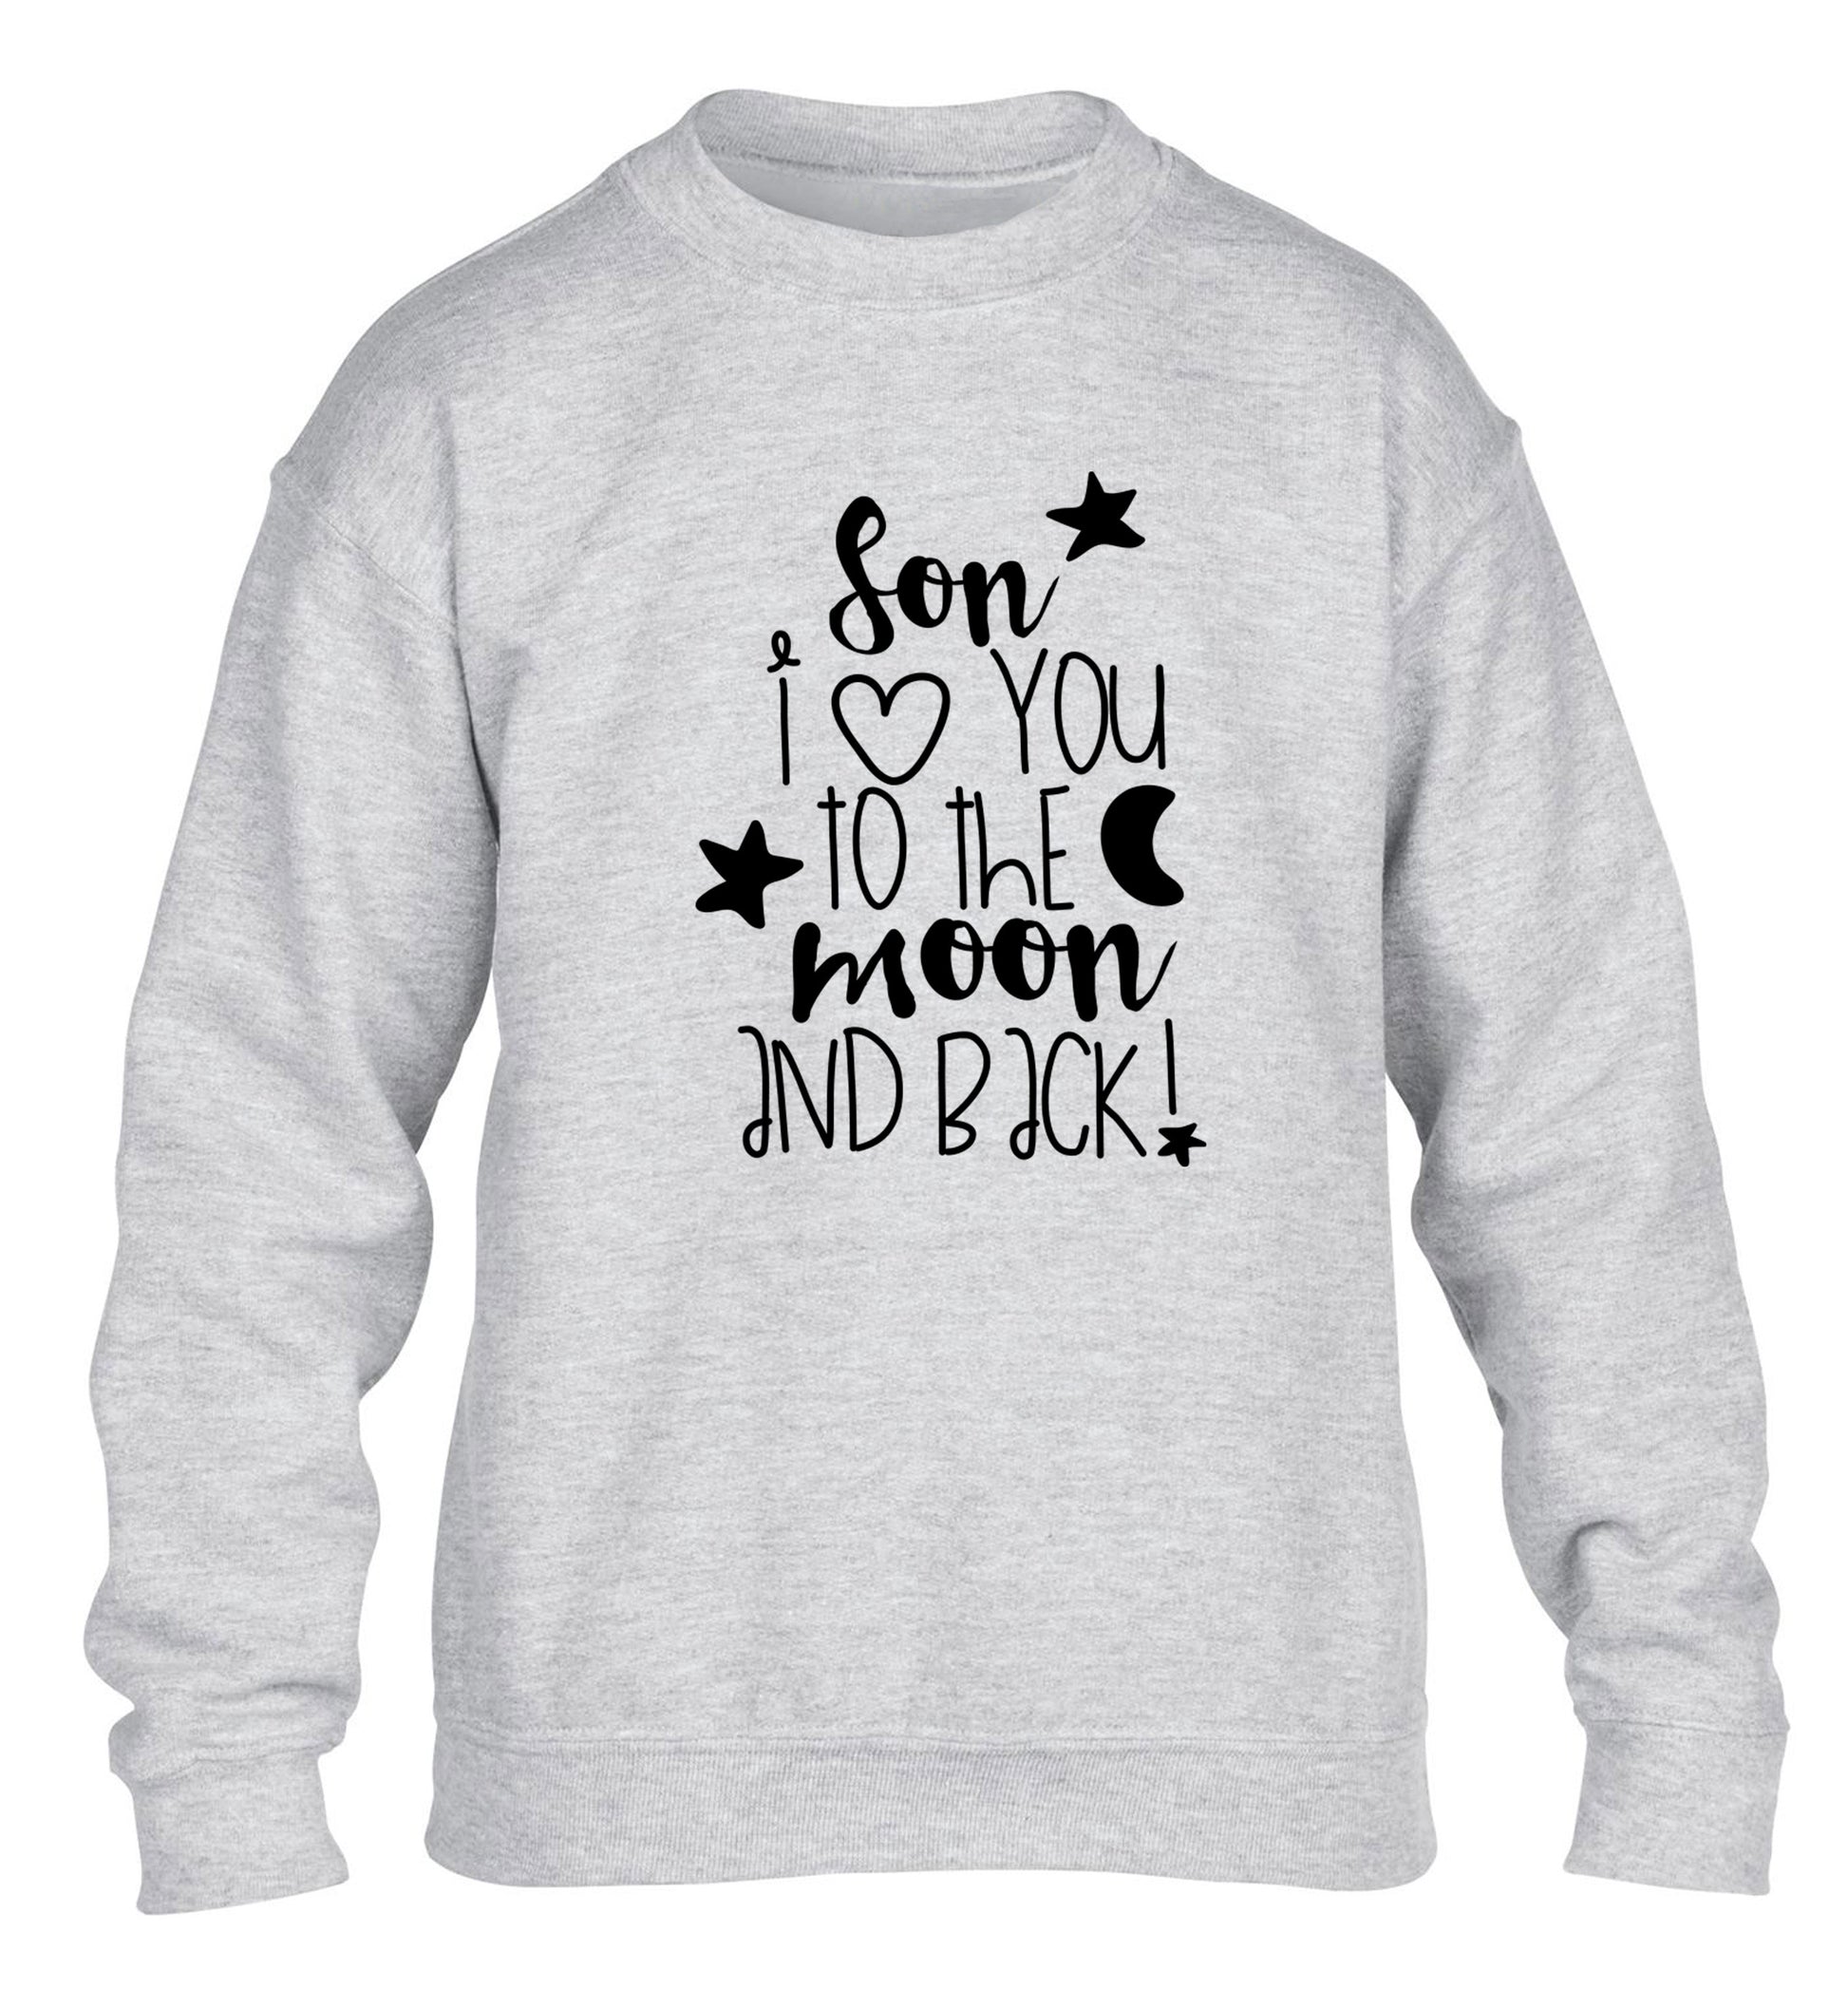 Son I love you to the moon and back children's grey  sweater 12-14 Years